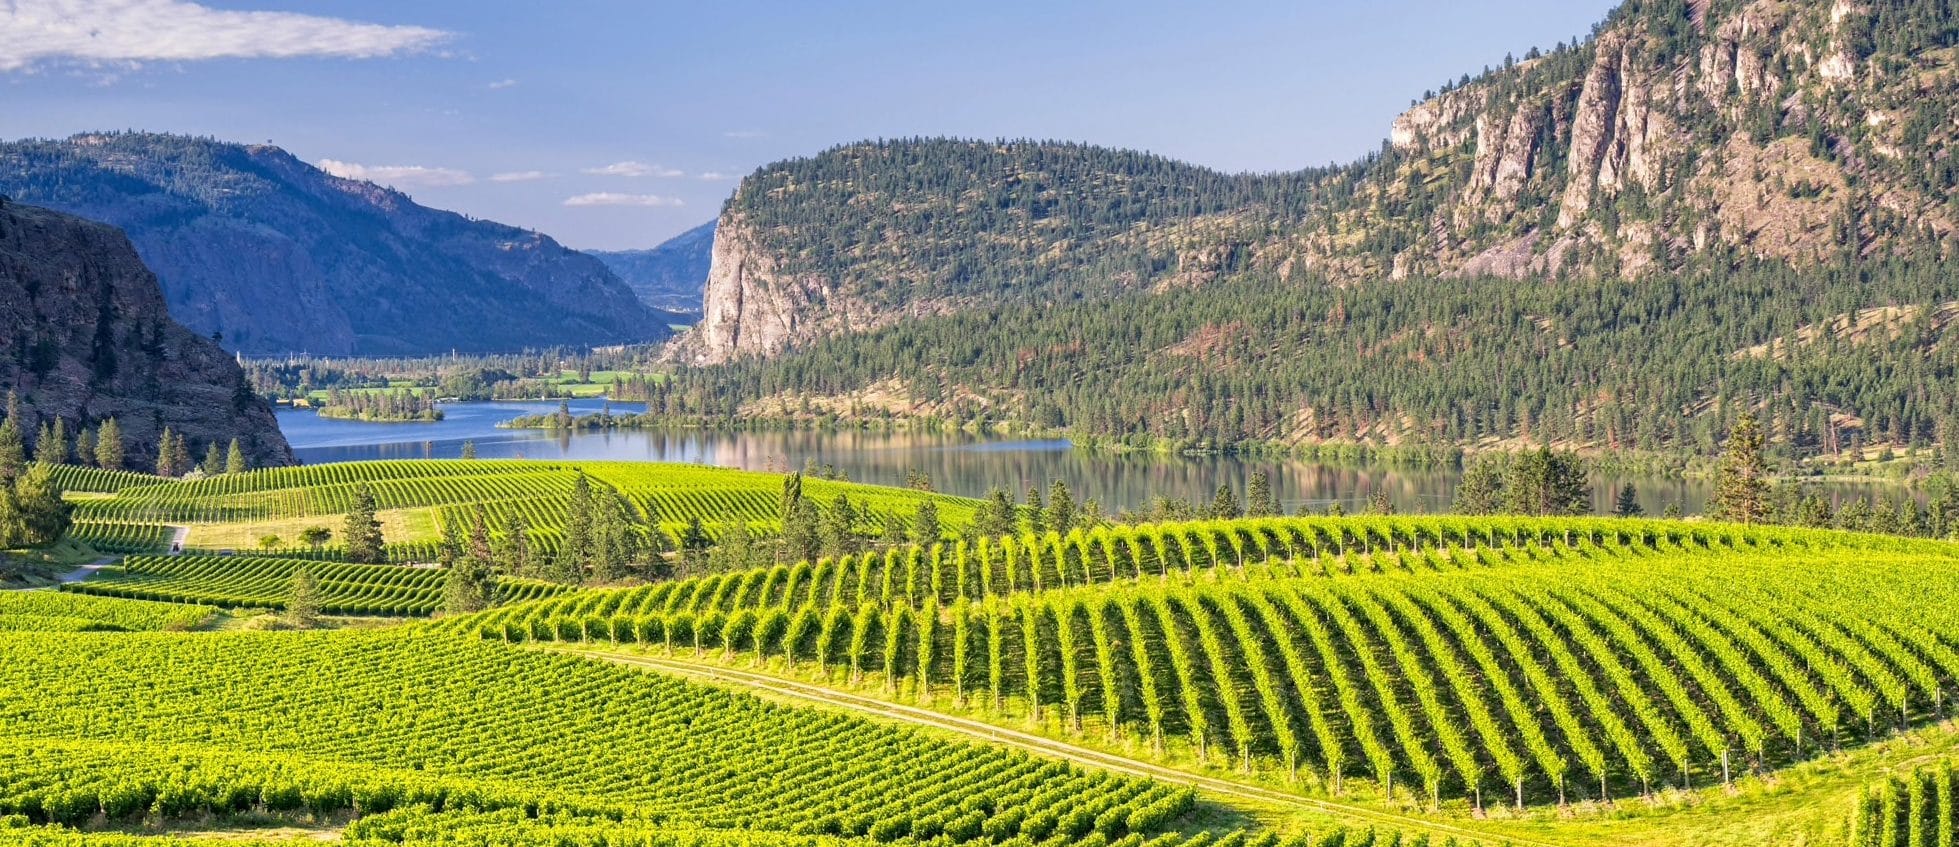 Osoyoos wine tour and vineyard in the summer